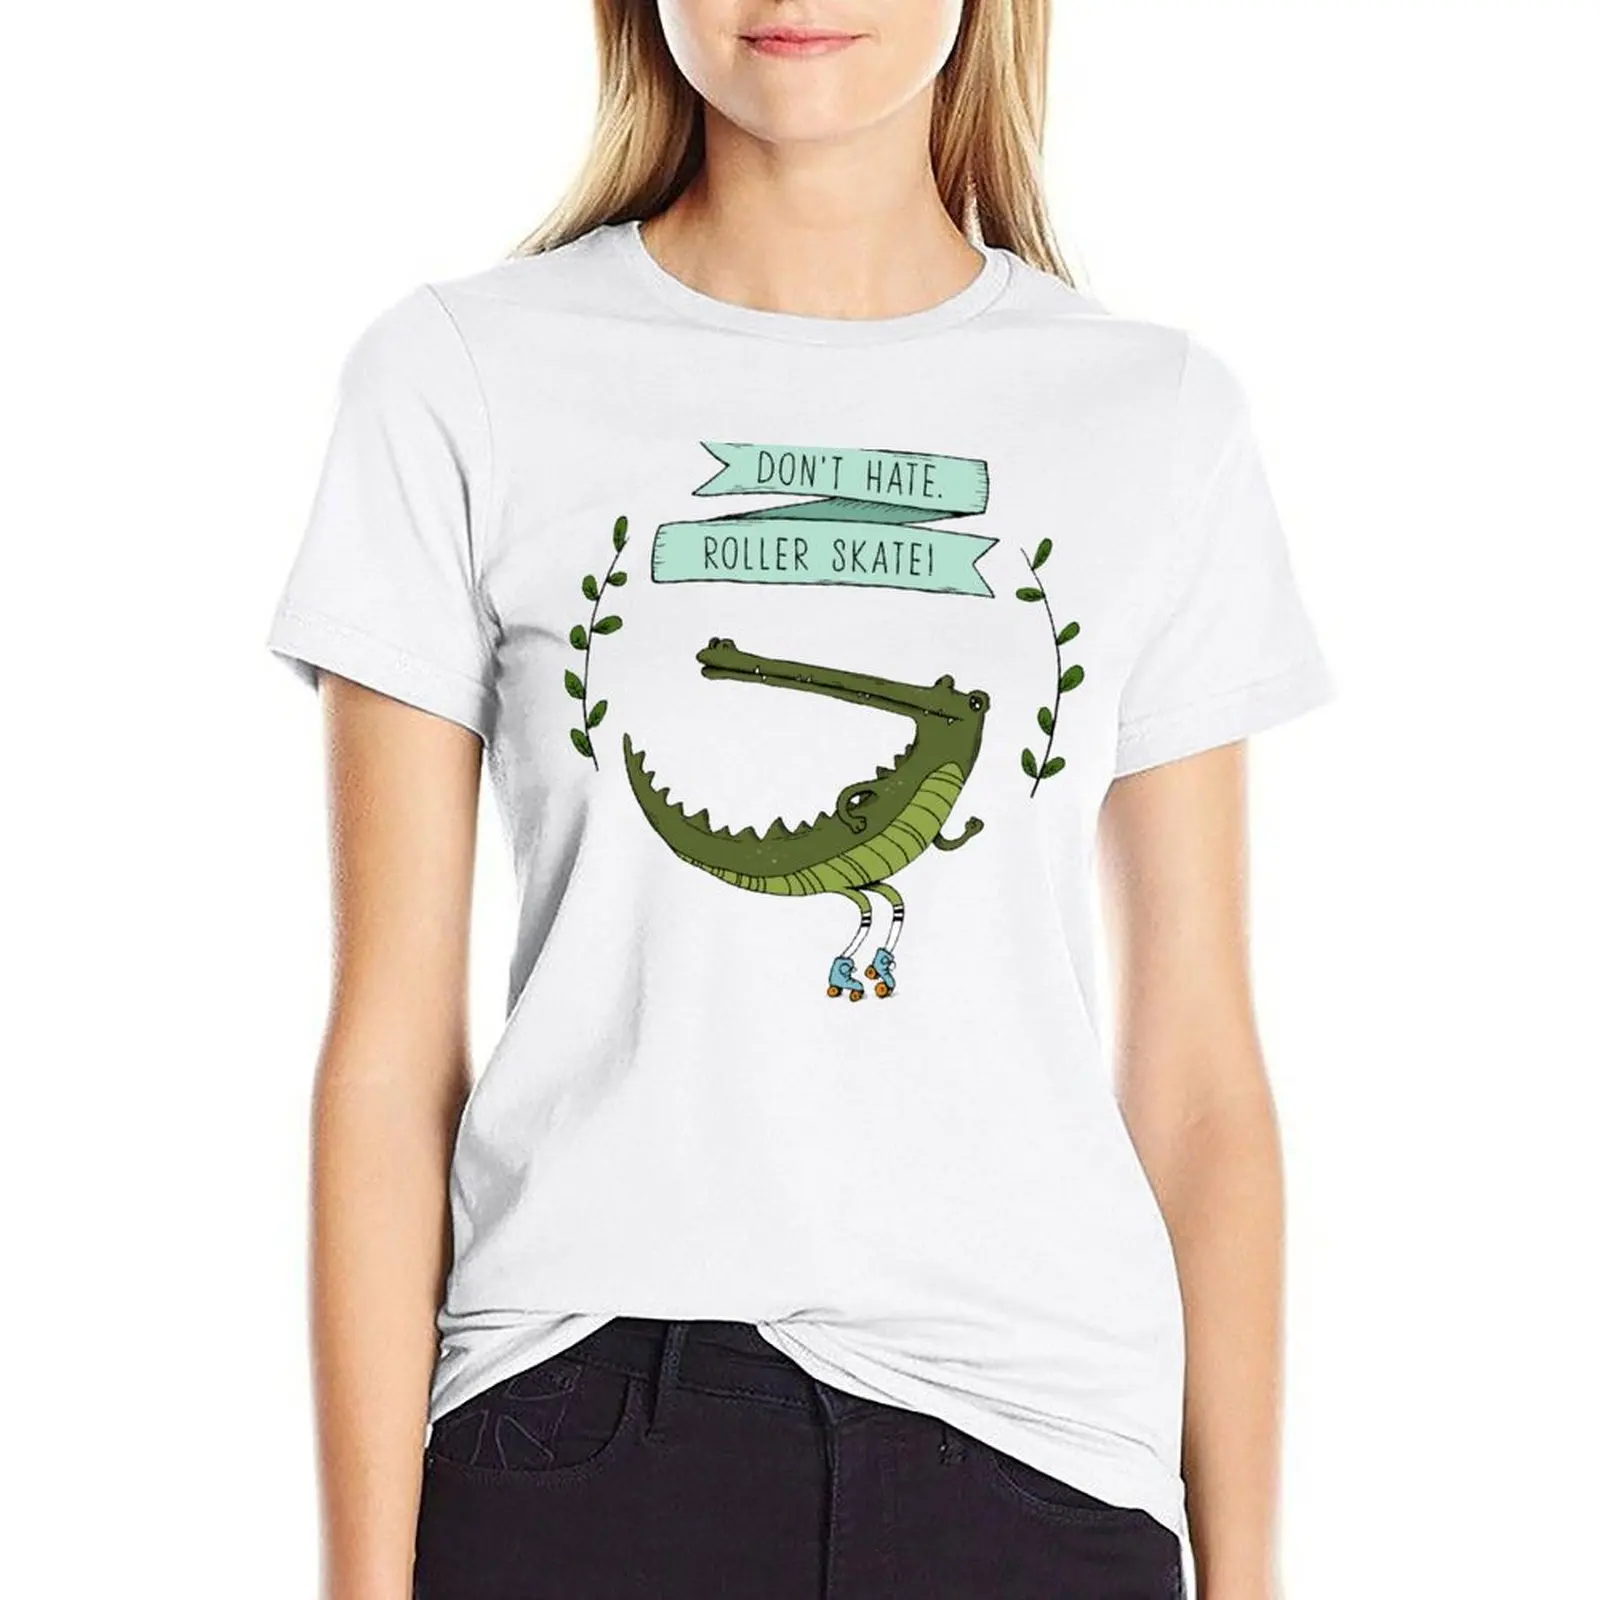 

Don't hate, roller skate crocodile T-shirt shirts graphic tees summer tops cute tops tshirts for Women